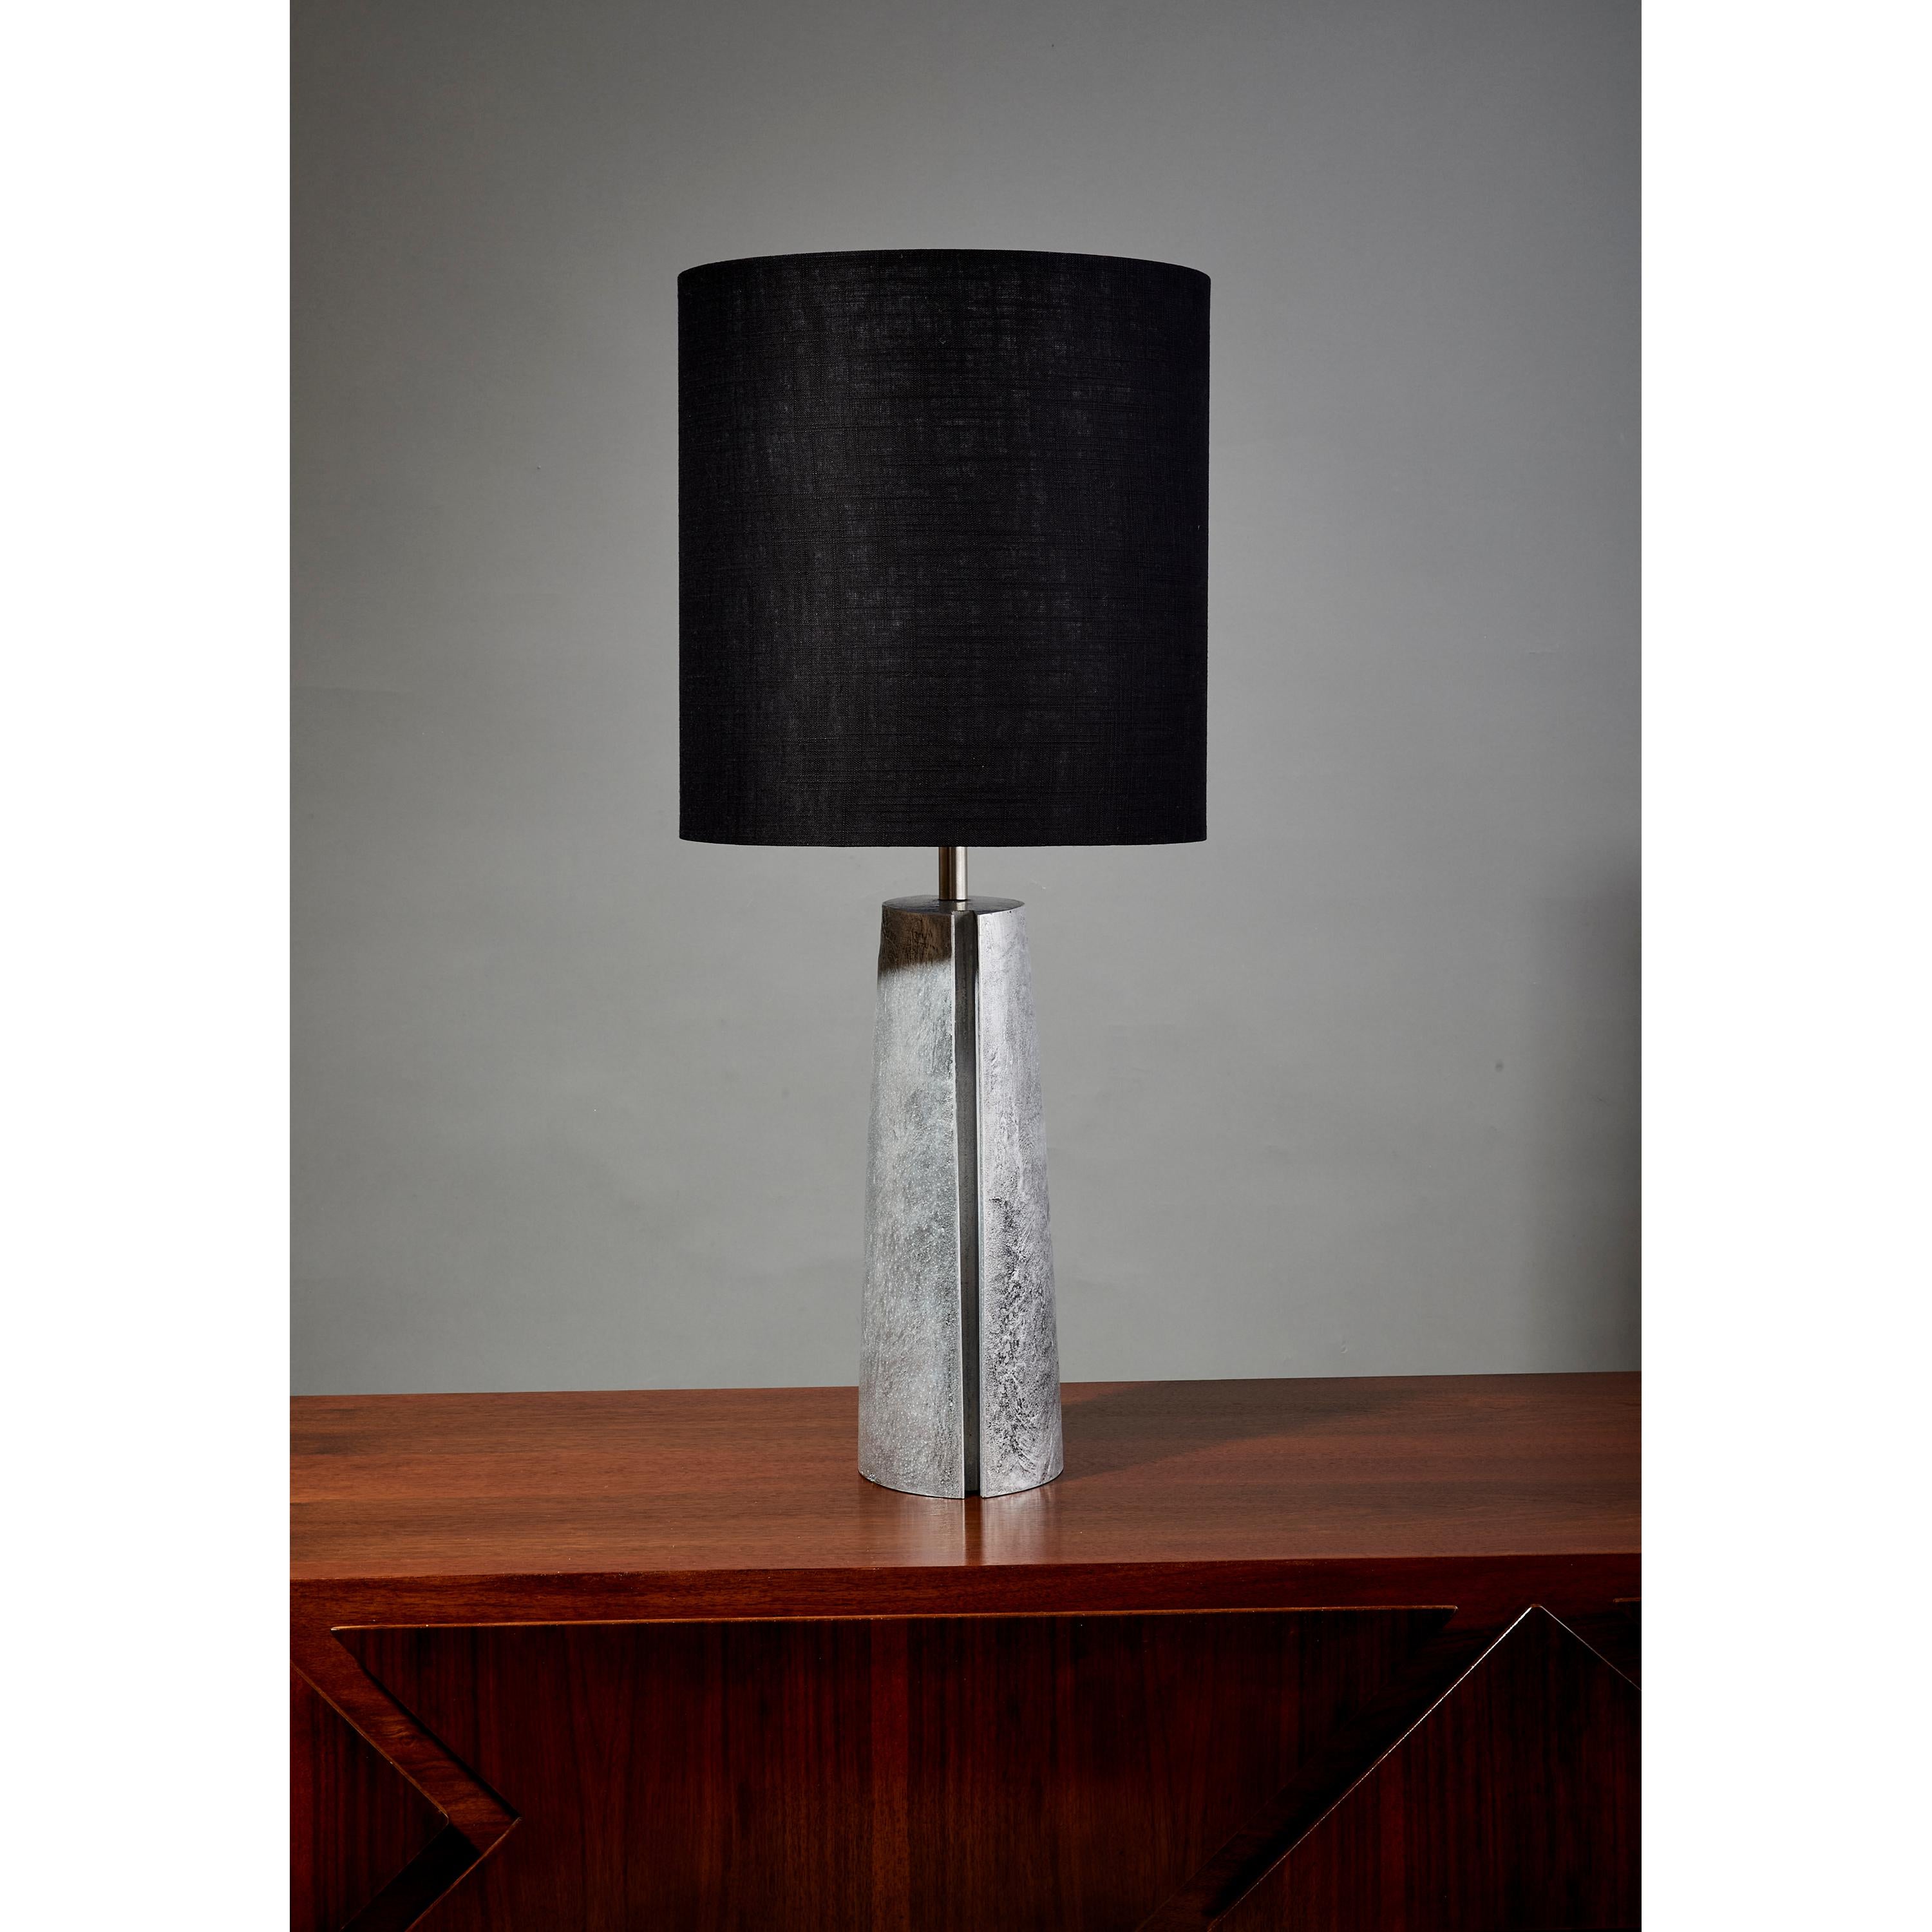 Italian Brutalist Table Lamp in Silver Textured Aluminium with Black Shade, Italy 1970's For Sale